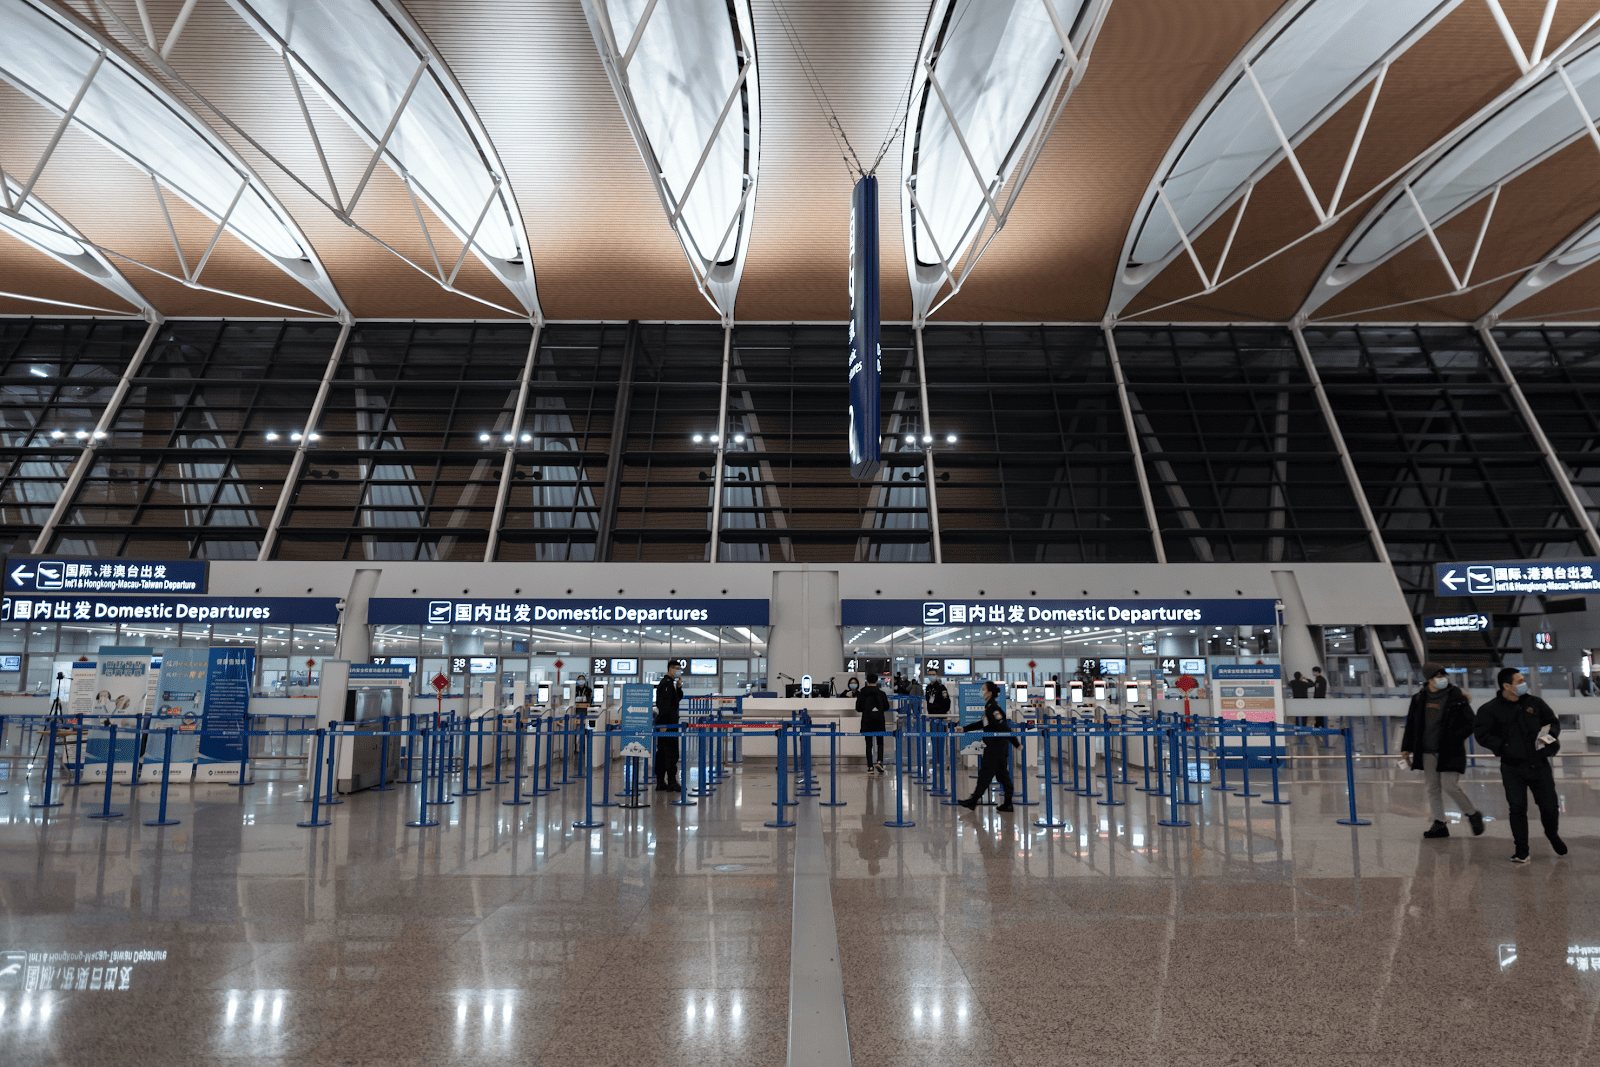 Key Features of Airport Access Control System